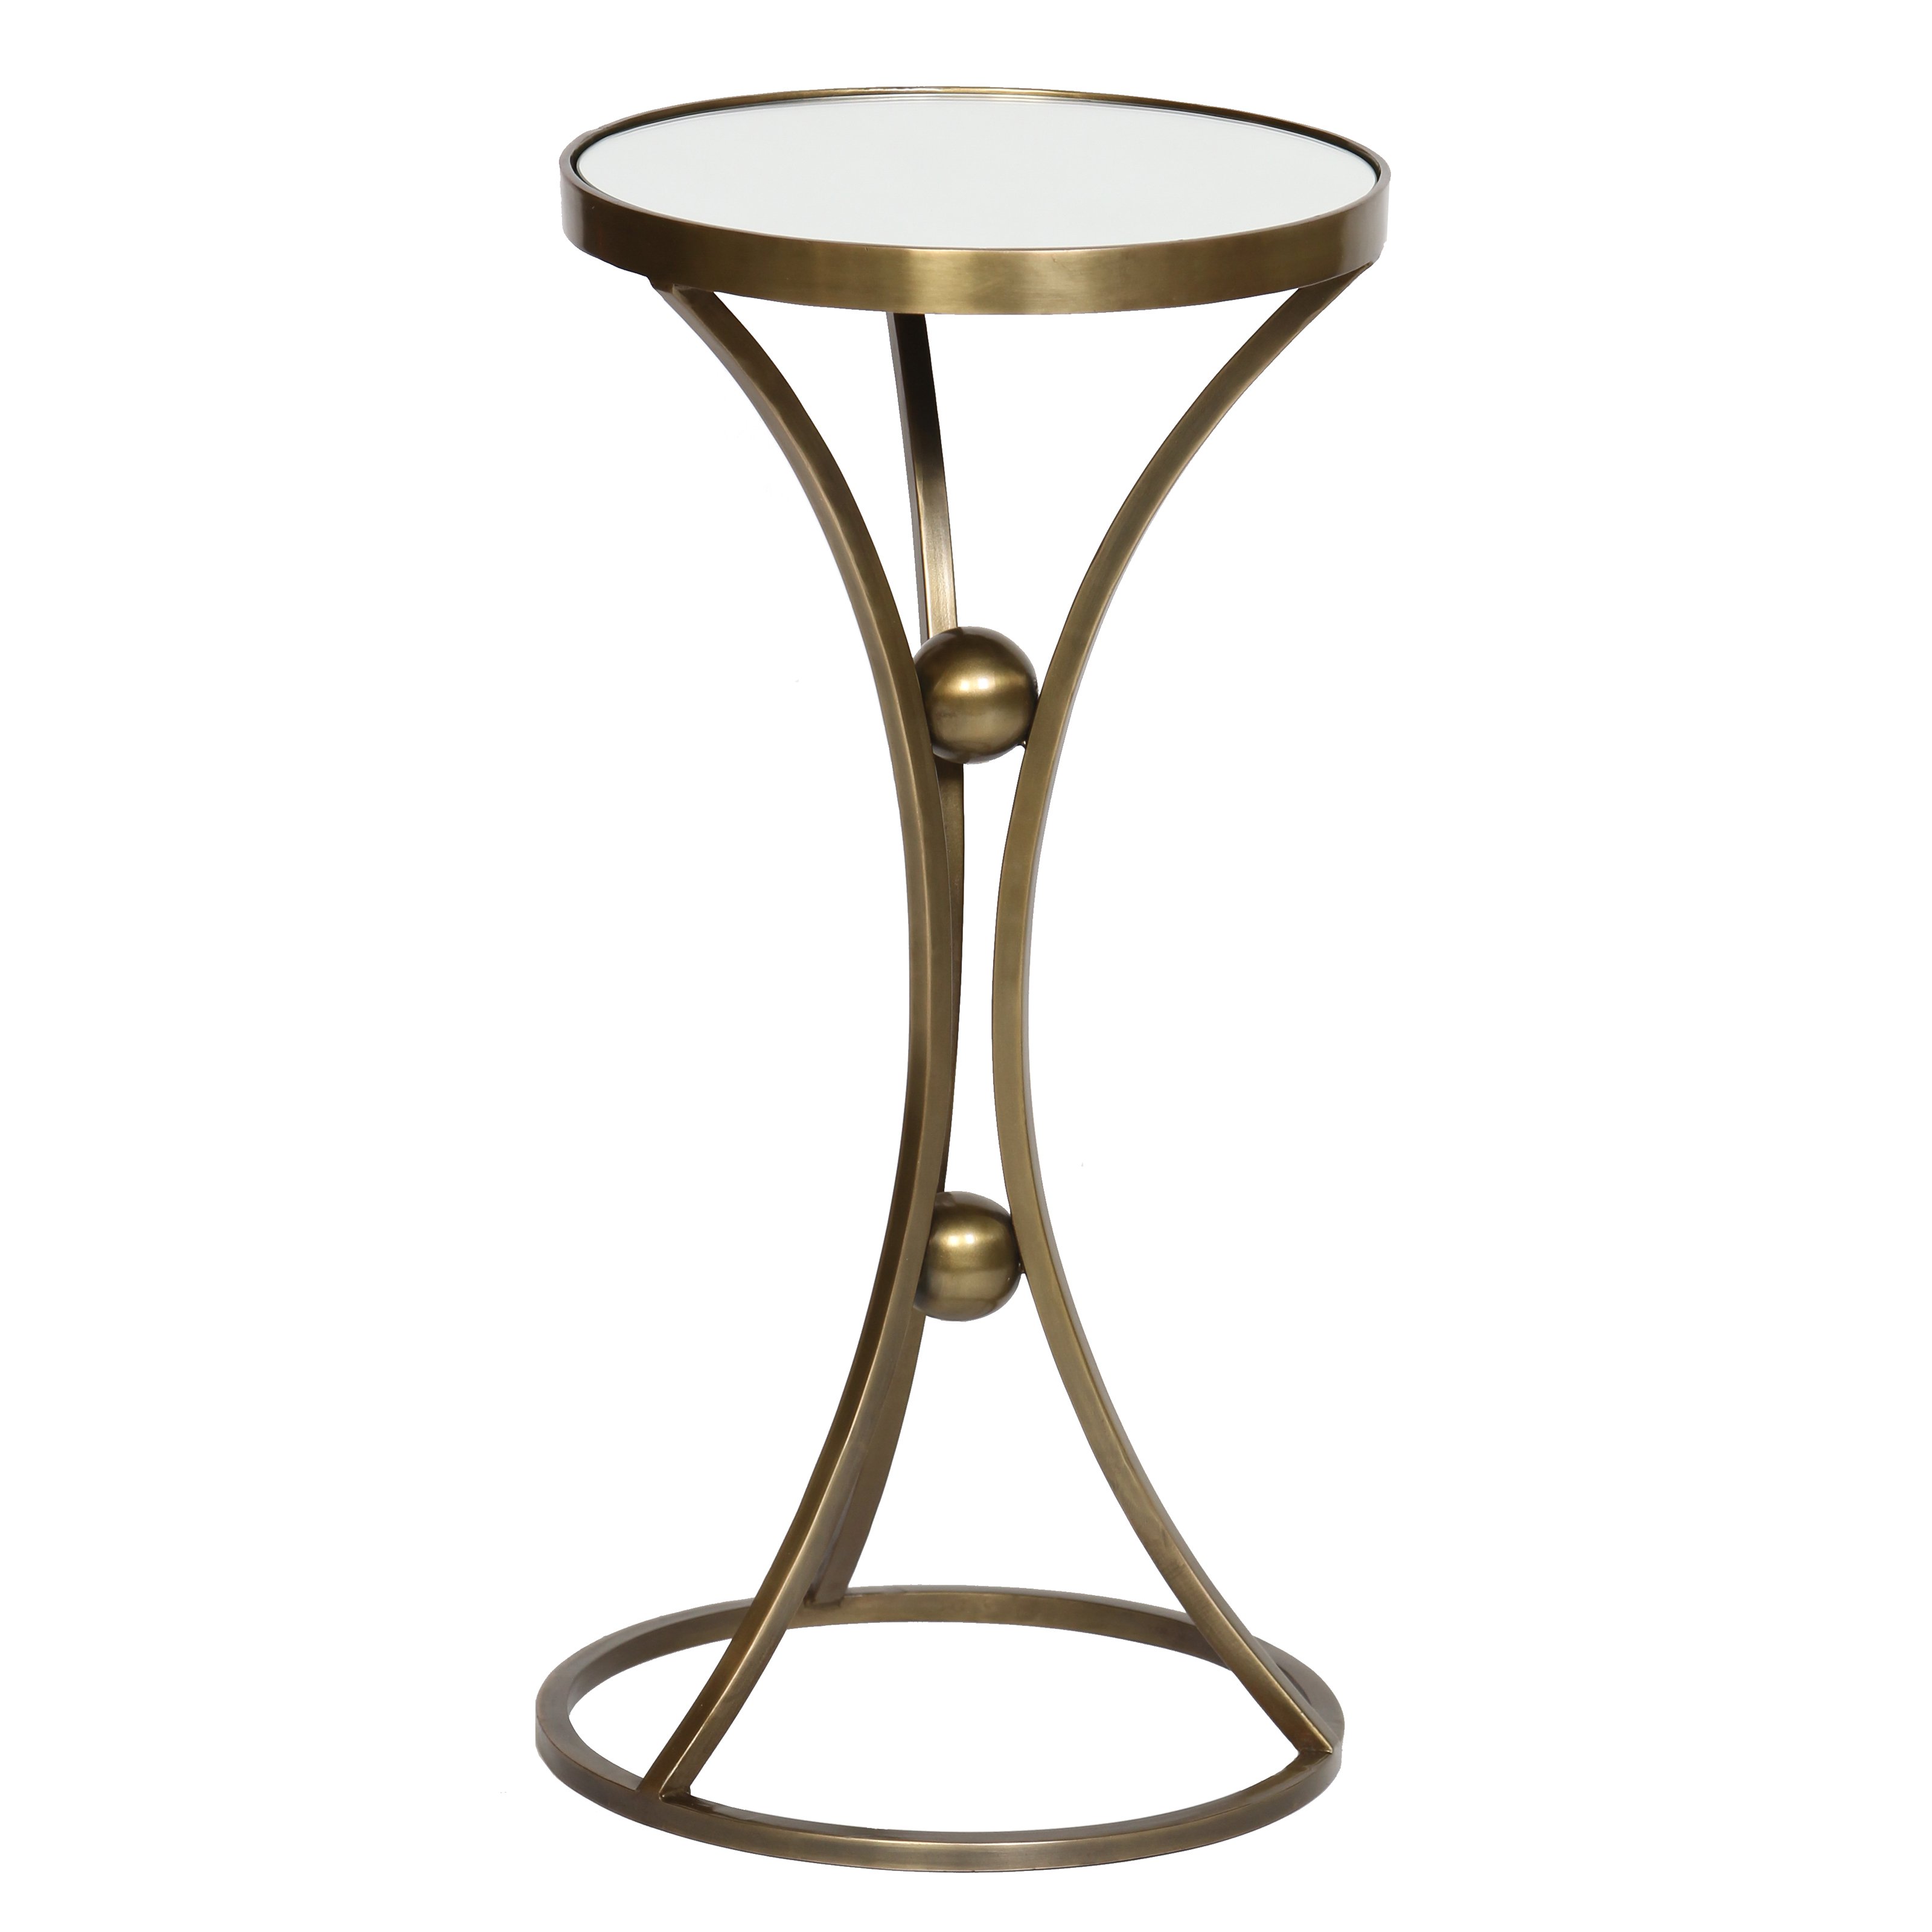 prima legged accent table antique brass transitional style end tables small rectangular board game coffee wood pedestal base cigar humidor cabinet play farm dining room sets round